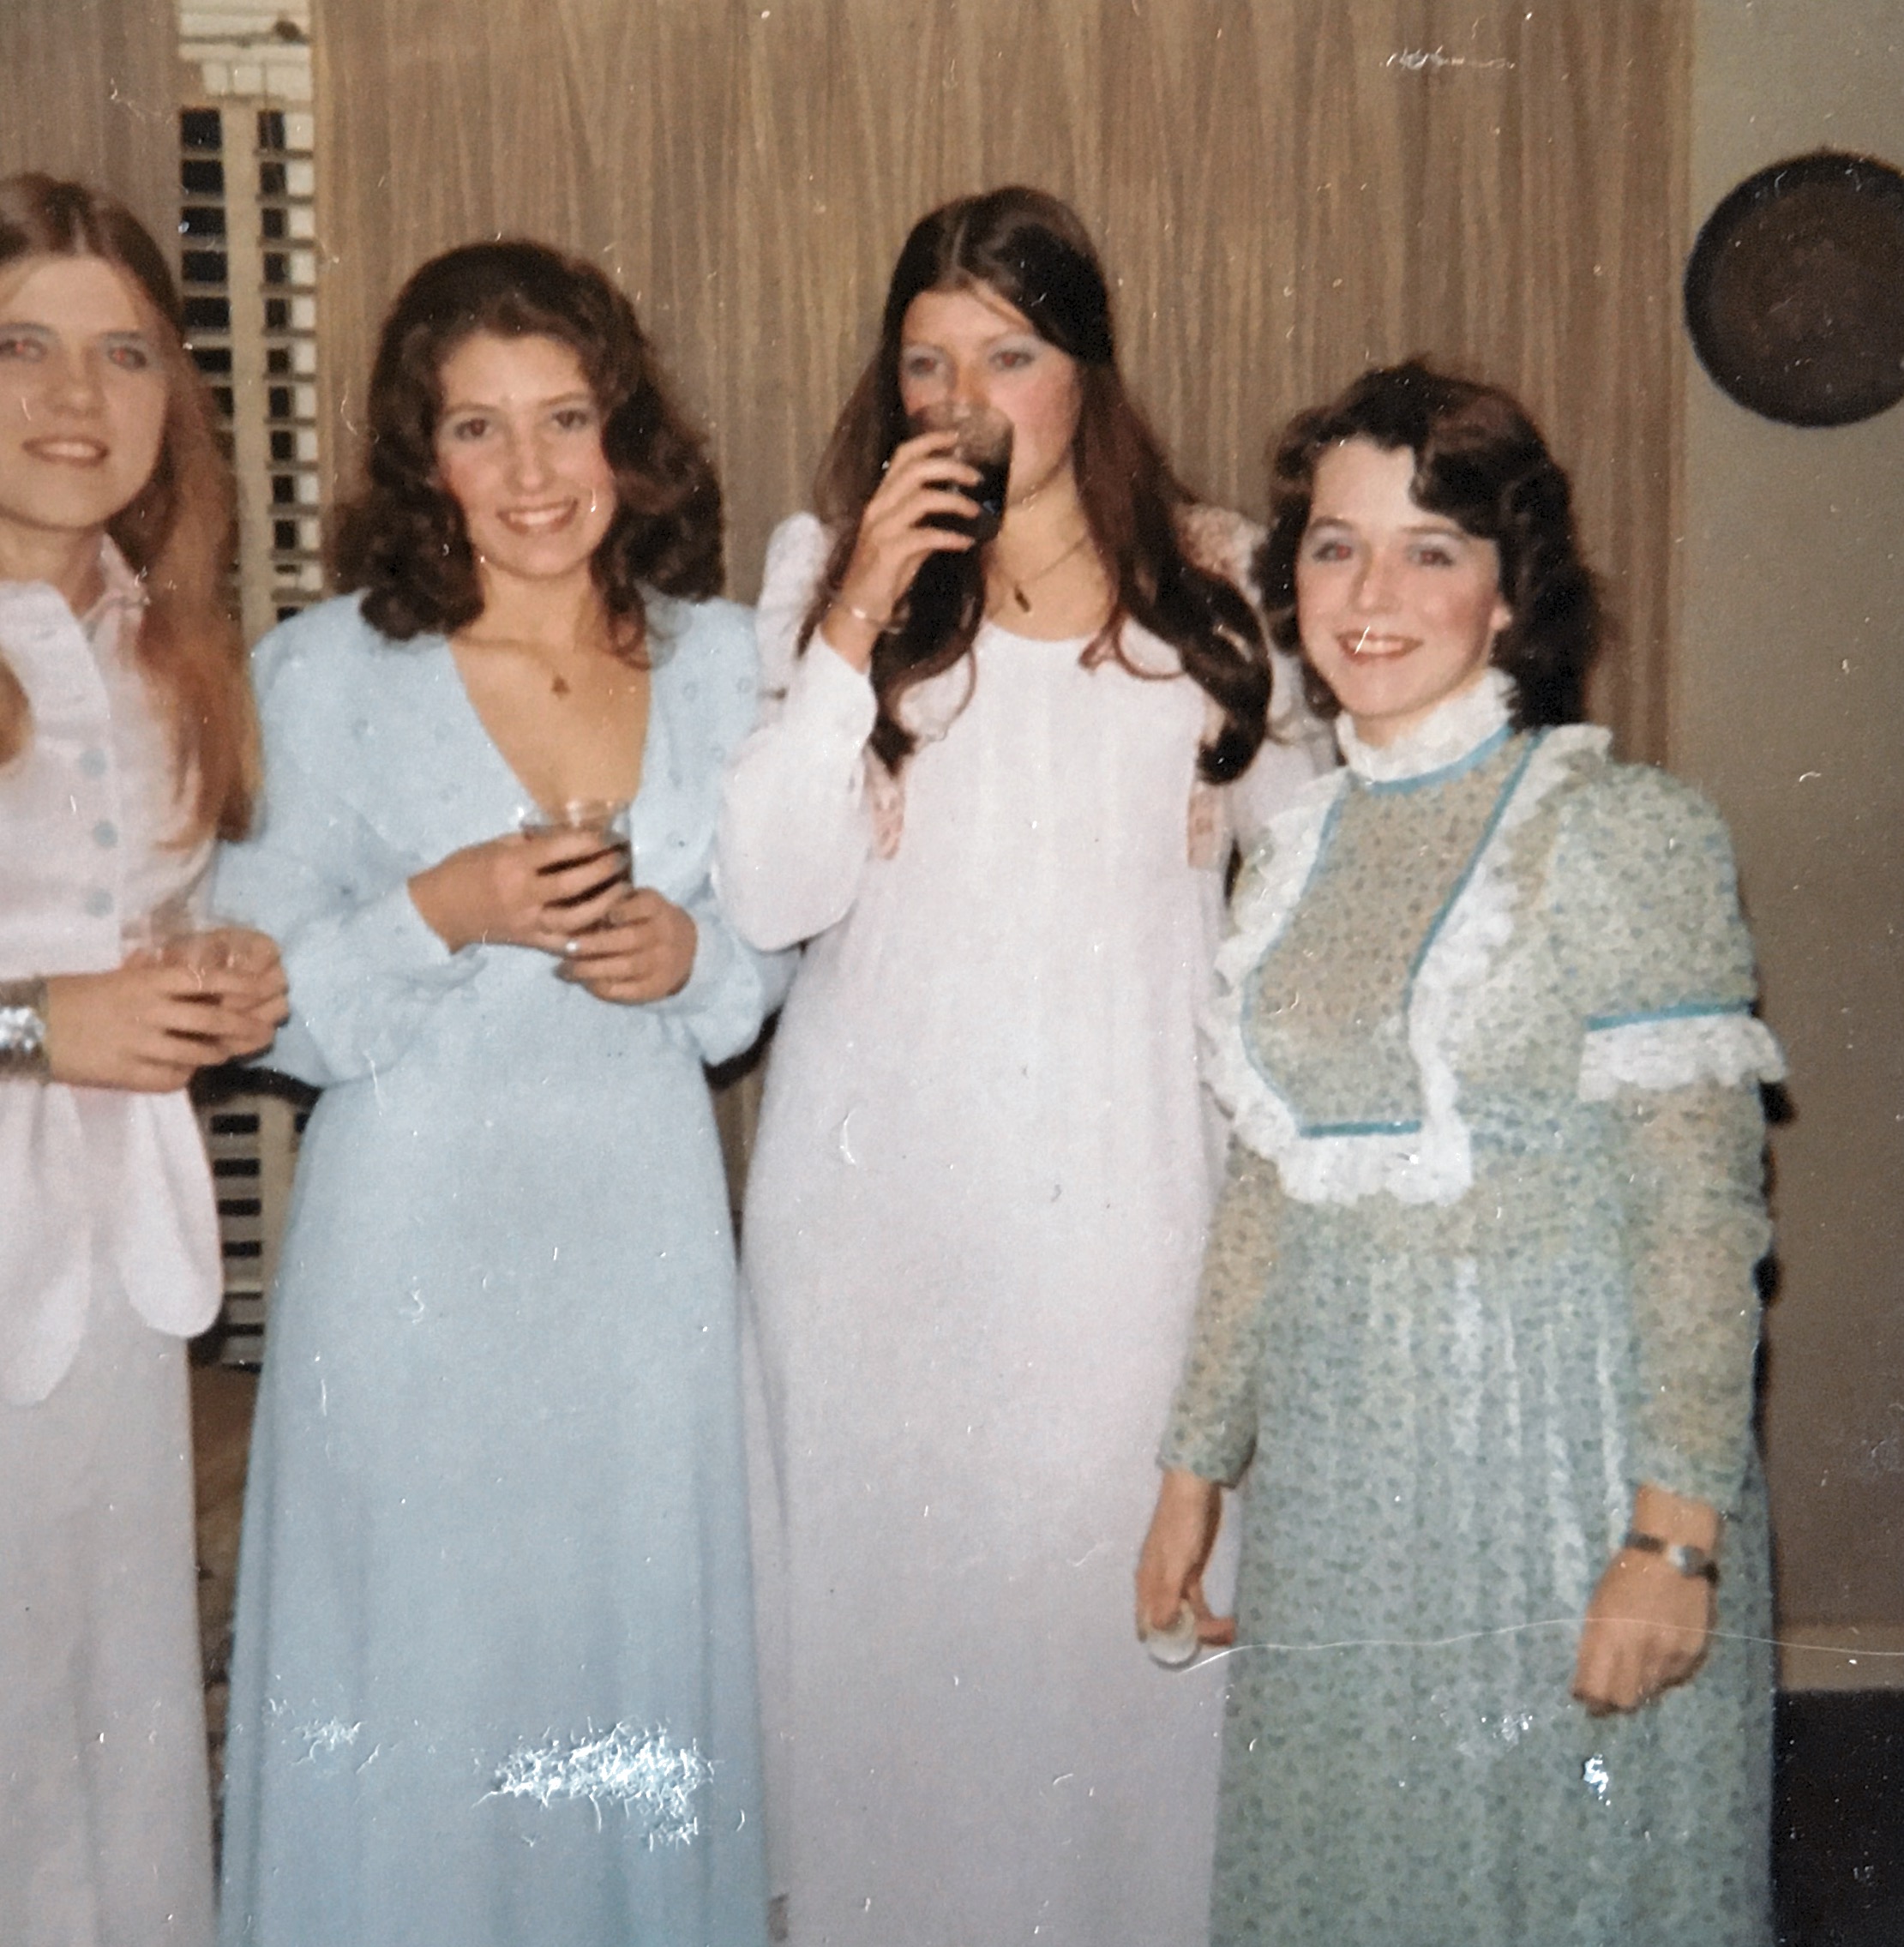 Pre drinks at the Davies’ house. Hales Ball, celebrating Fiona’s graduation. 1973. Always the one with the drink.